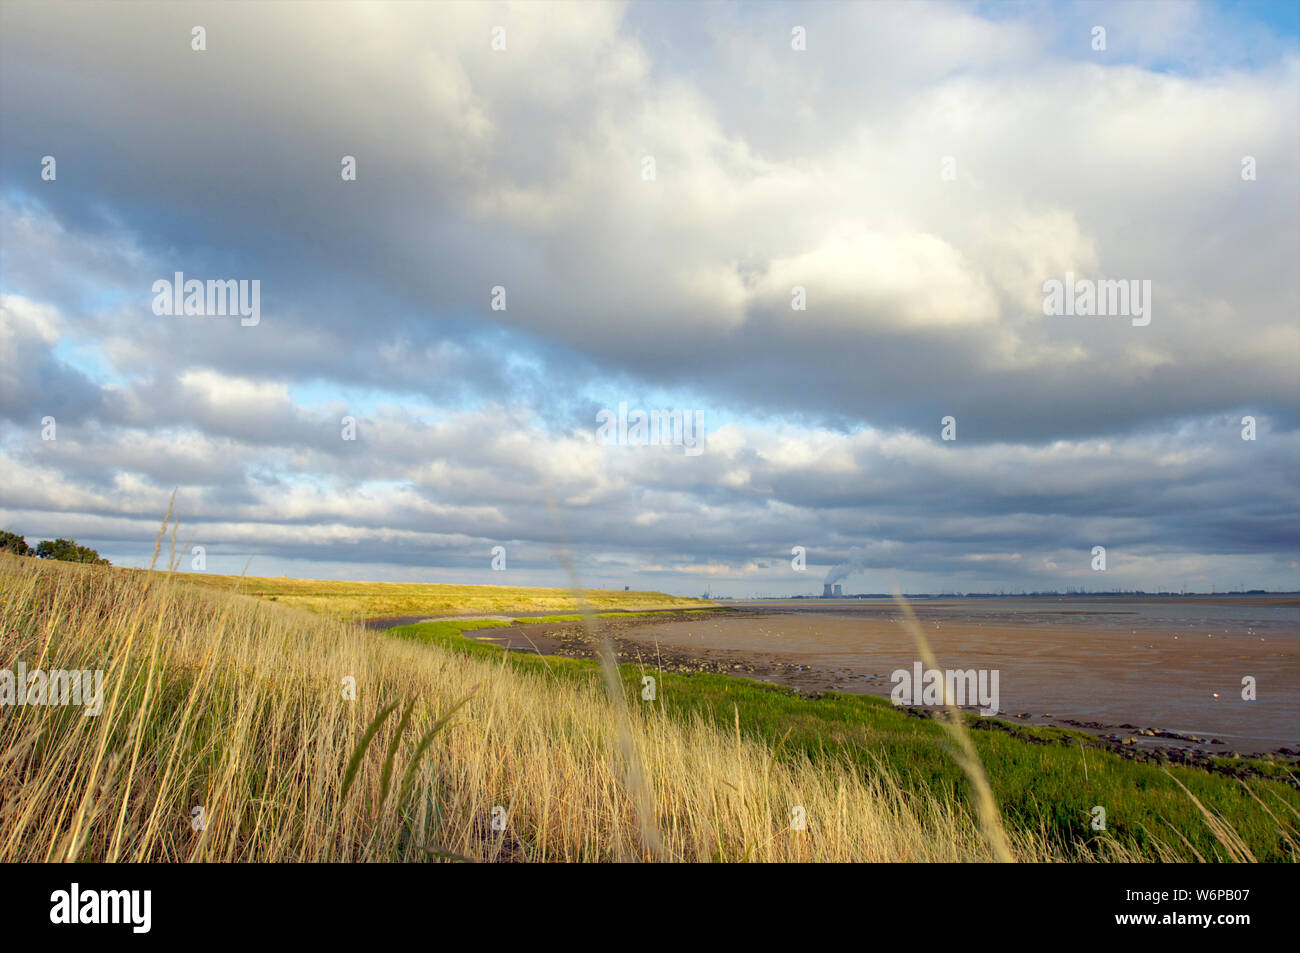 The Western Scheldt at low tide and the dike used as farmland with the Doel nuclear power plant in the background in Zeeland, the Netherlands Stock Photo